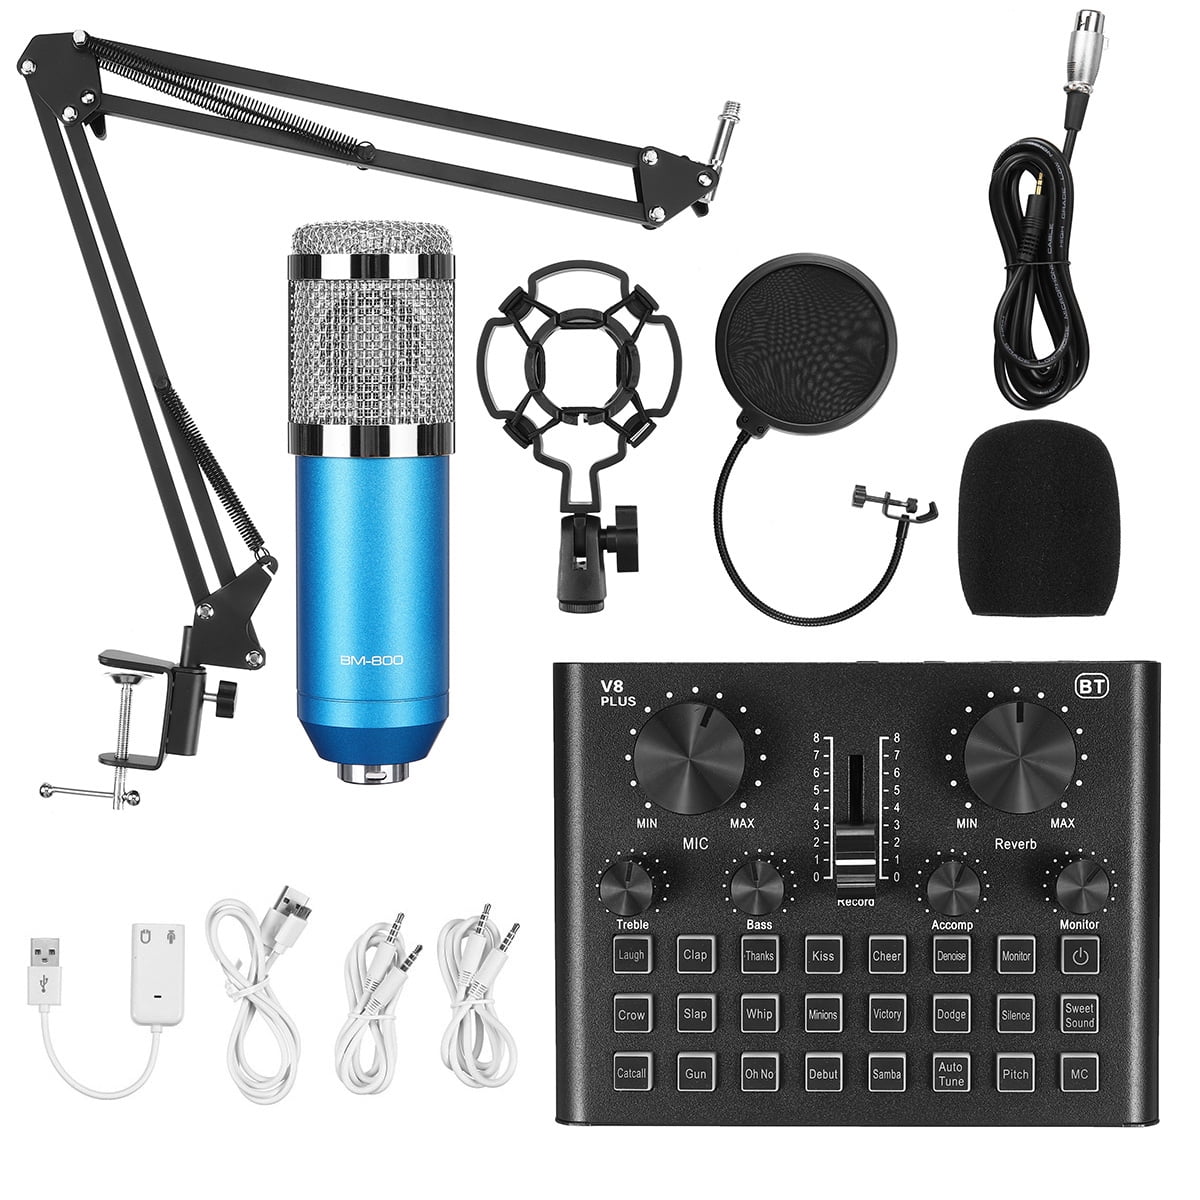 Condenser Microphone Live Sound Card SET Professional Cardioid Mic Bundle for Pc/Laptop Recording Studio,Voice Changer Device for PS4/Xbox/Phone/iPad,YouTube Podcast Vocal Broadcasting Gaming Golden 